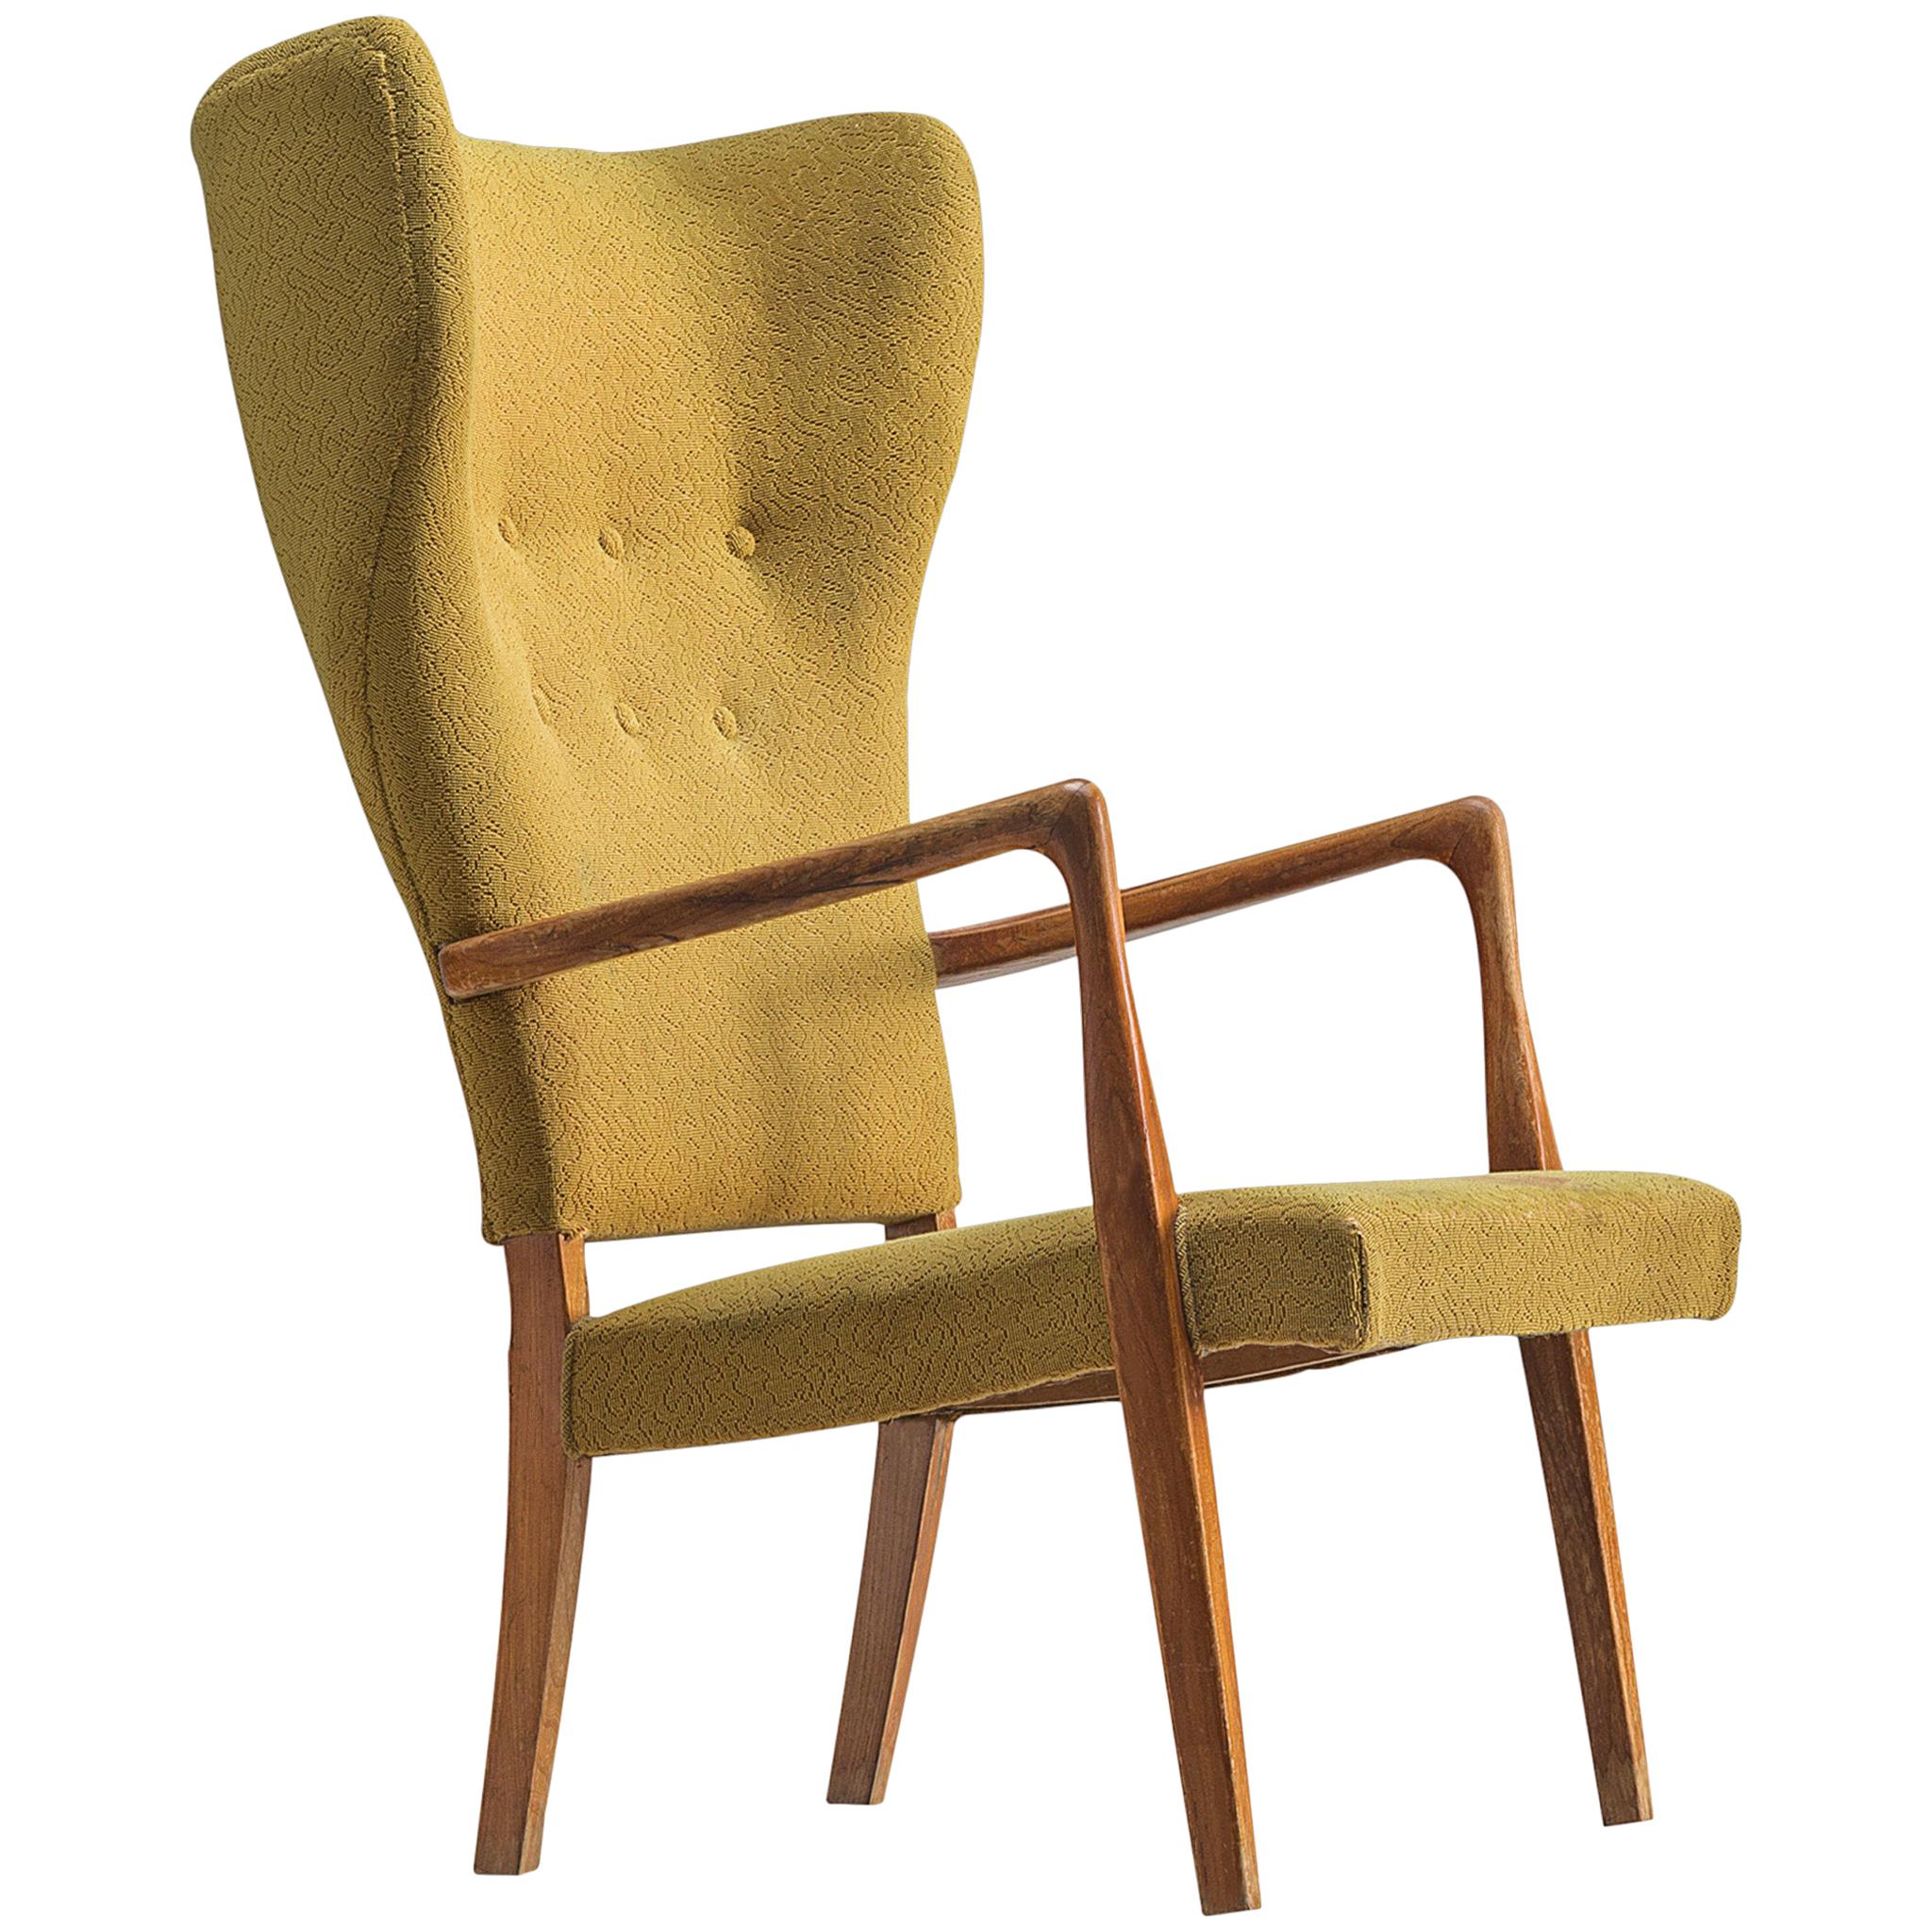 Danish Wingback Chair with Original Upholstery